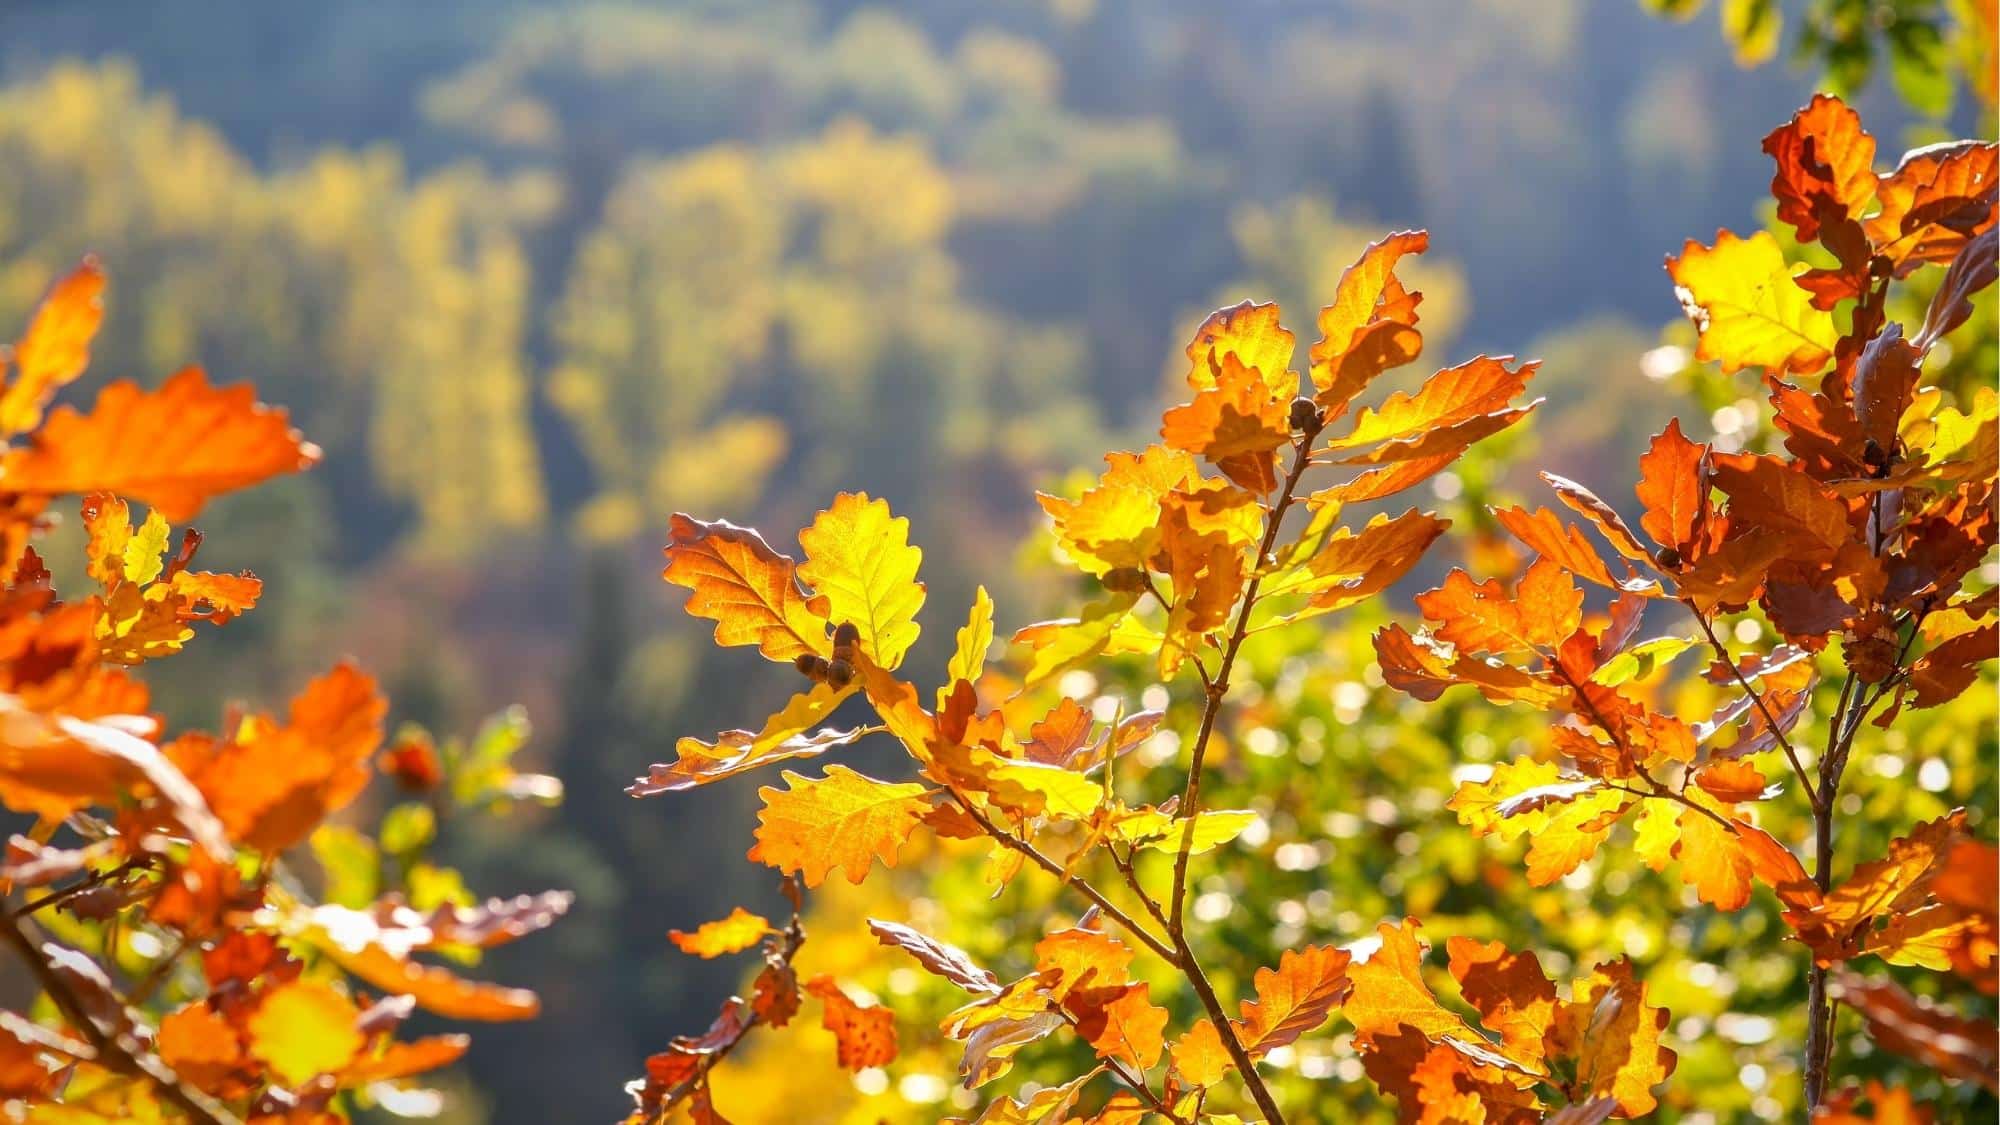 Autumn Leaves; The Science Behind The Scenery